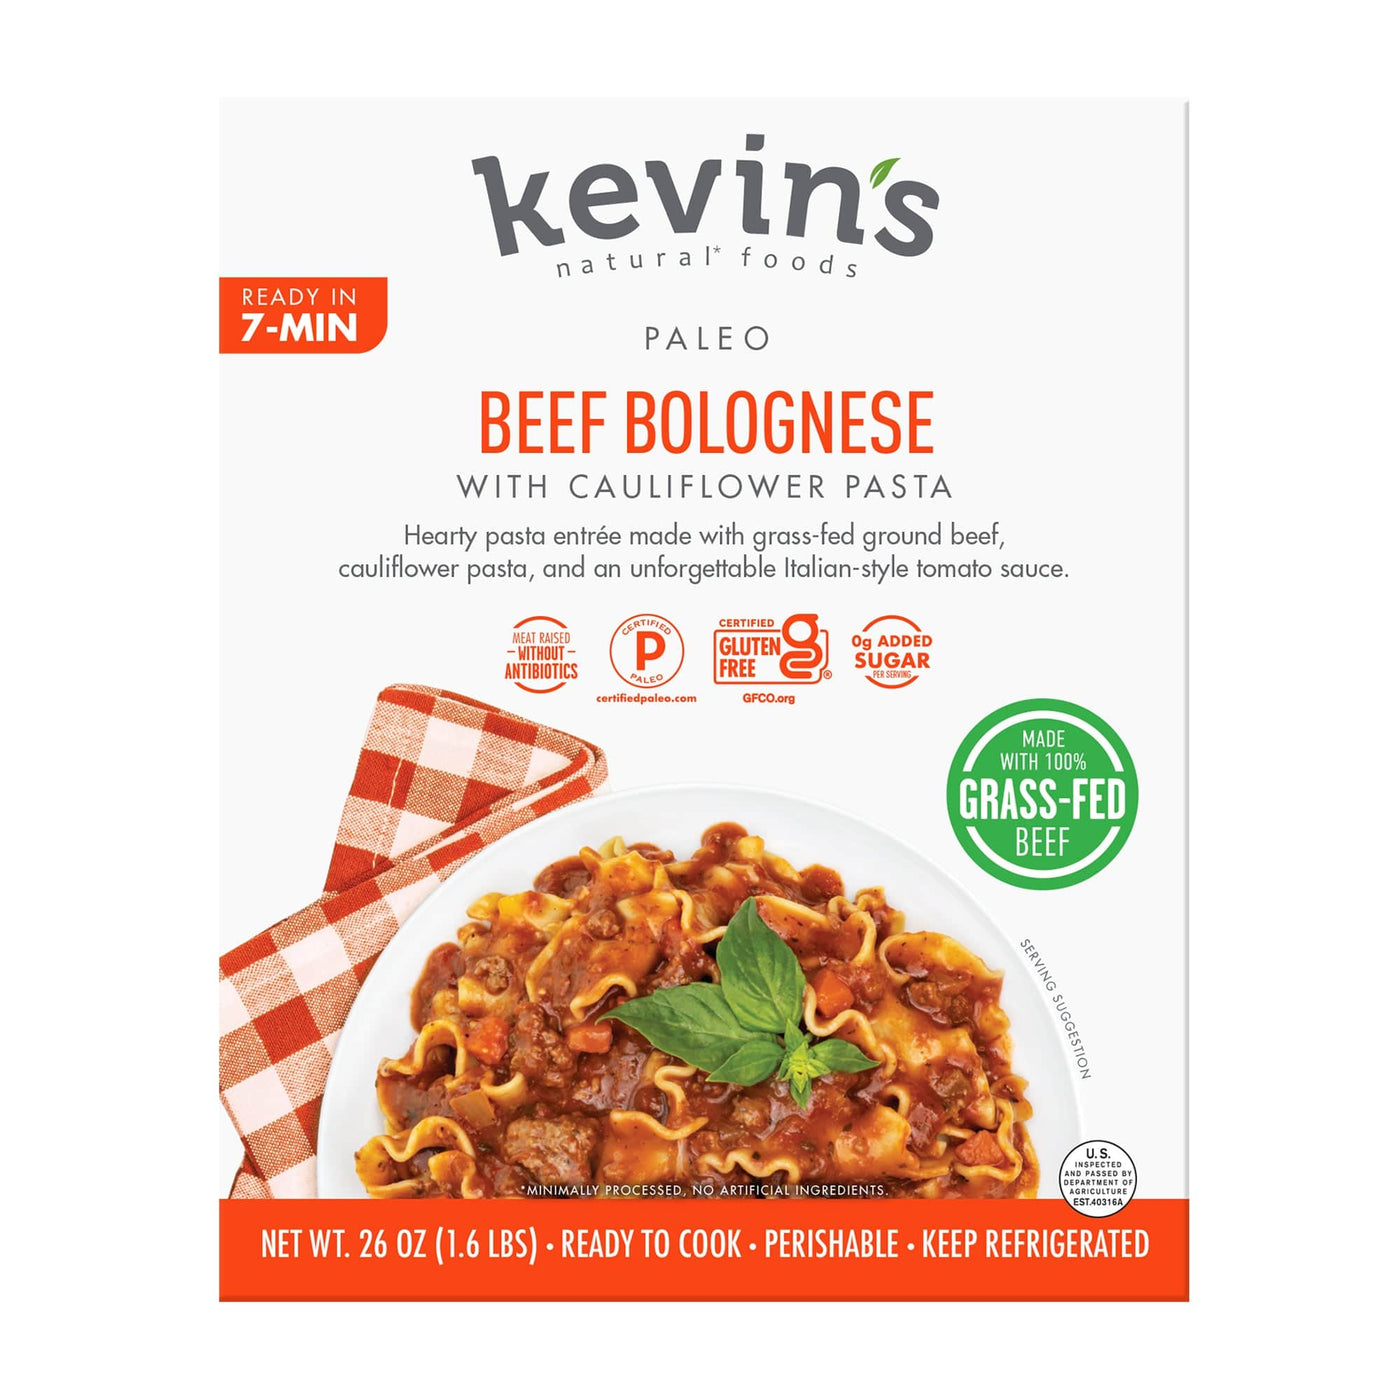 Beef Bolognese with Cauliflower Pasta